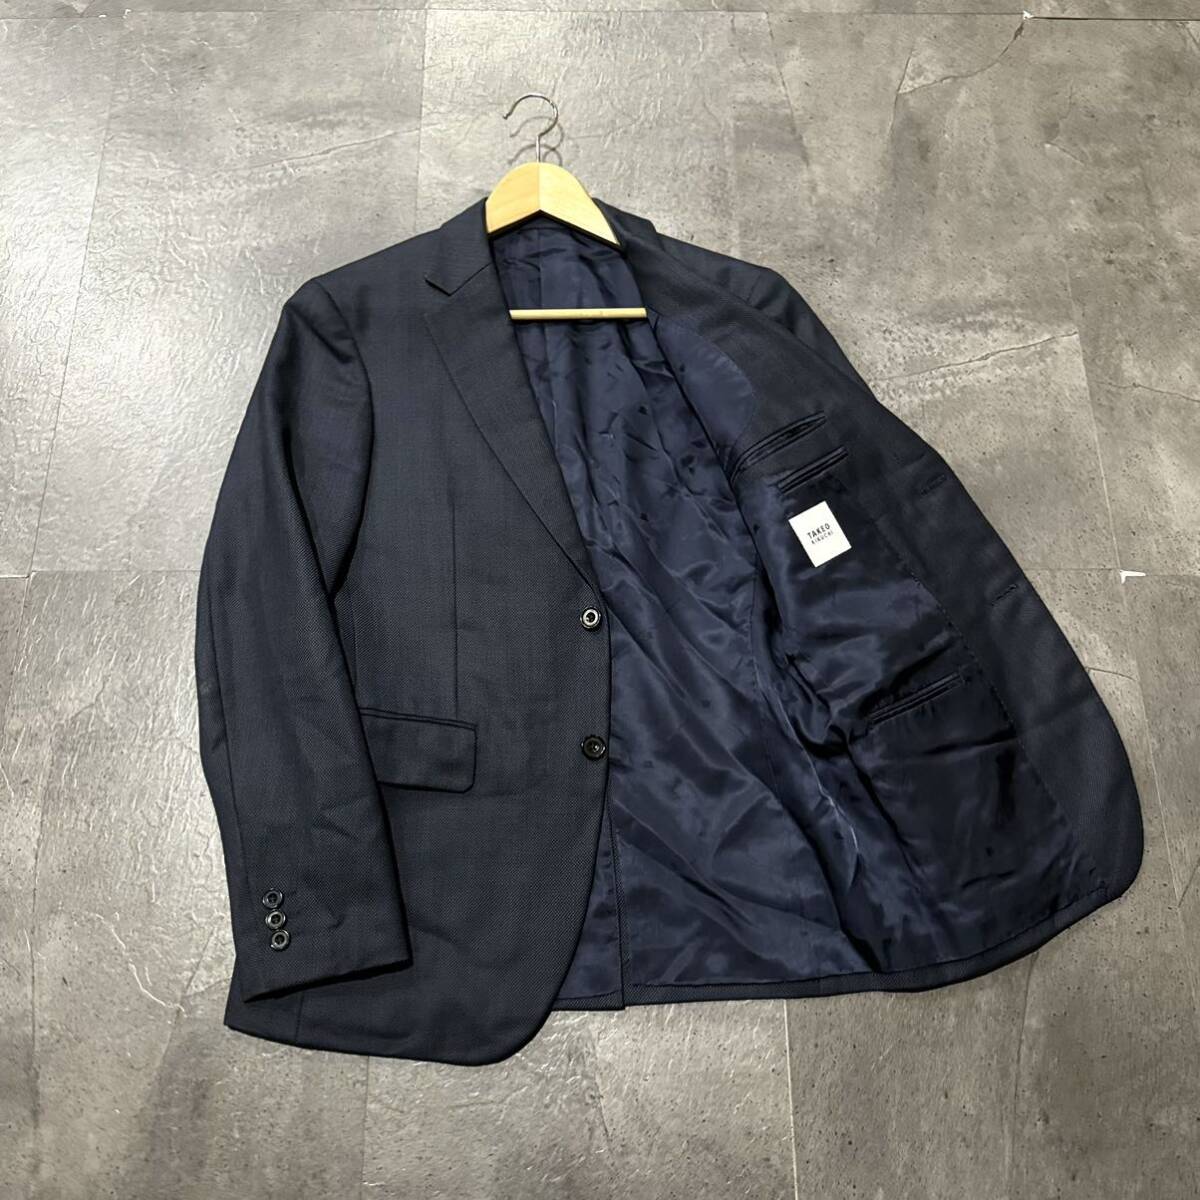 F * superior article / fine quality DORMEUIL company manufactured cloth \' made in Japan \' TAKEO KIKUCHI Takeo Kikuchi WOOL100% tailored jacket 2.size:2 men's outer gentleman clothes 